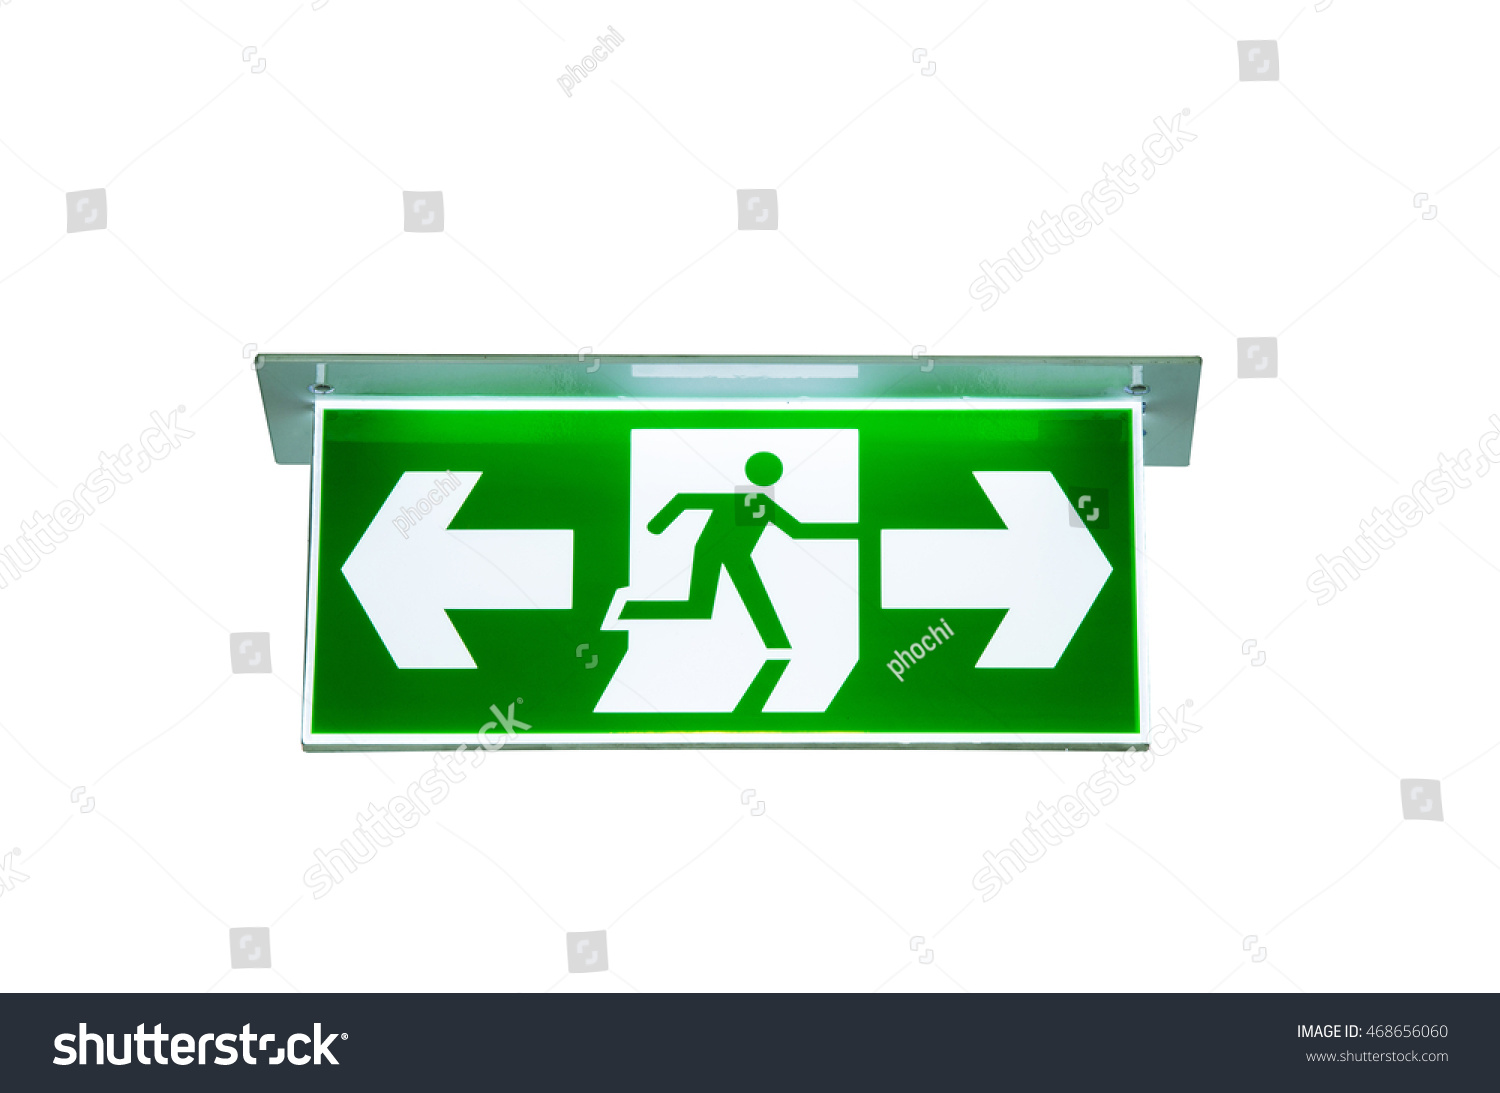 Green Emergency Exit Sign Way Escape Stock Photo (edit Now) 468656060